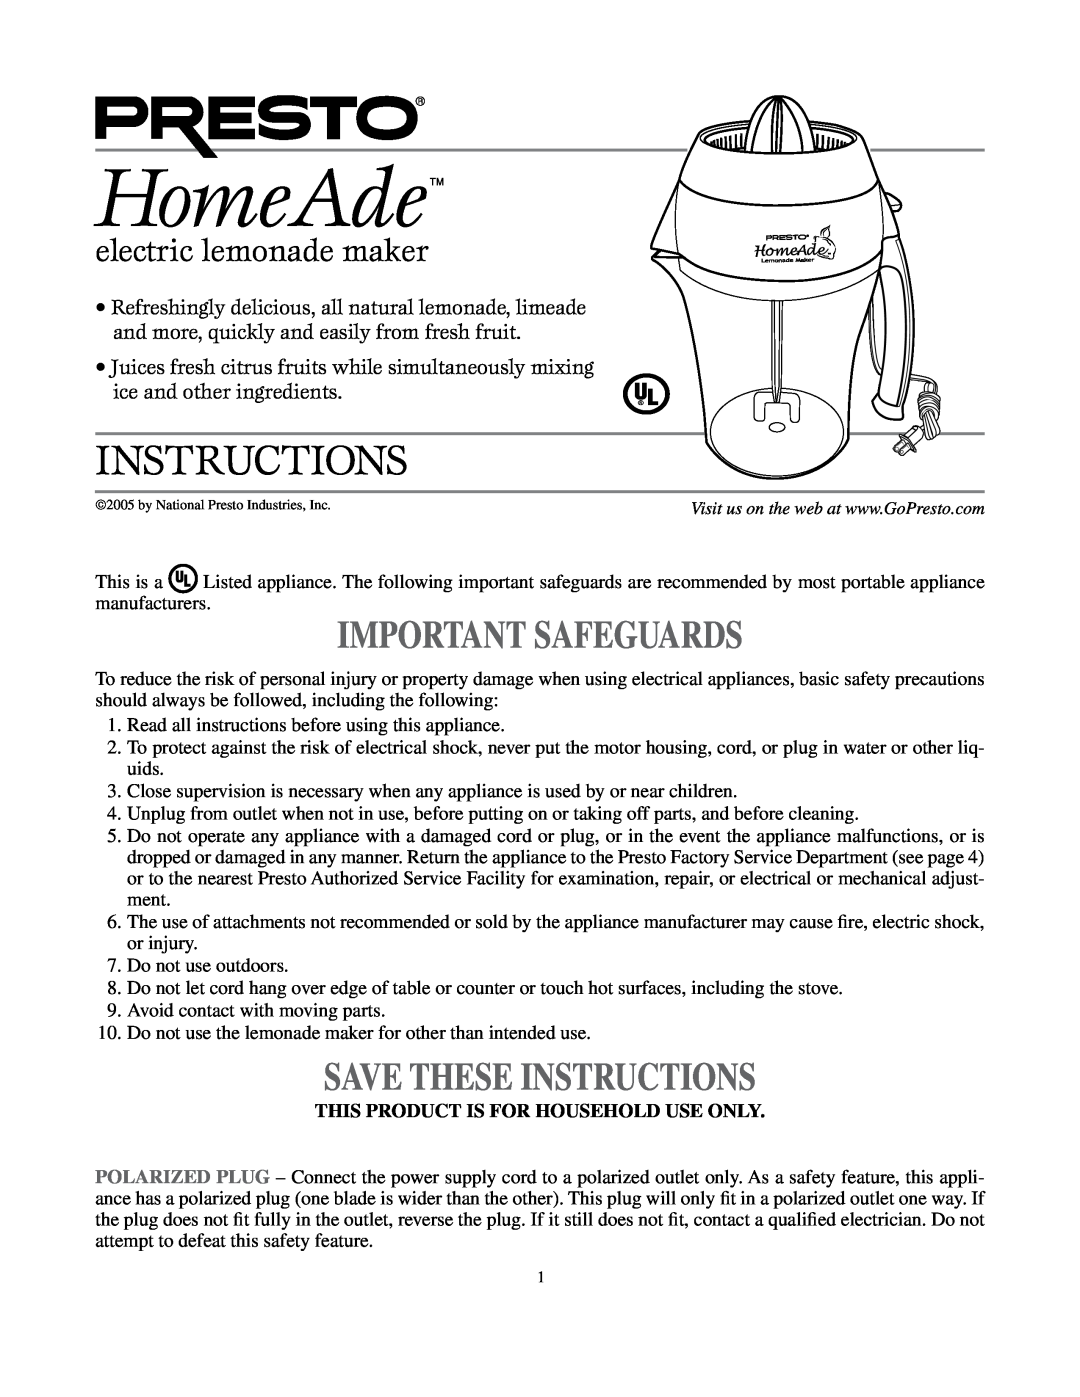 Presto electric lemonade maker manual HomeAde, Important Safeguards, Save These Instructions 